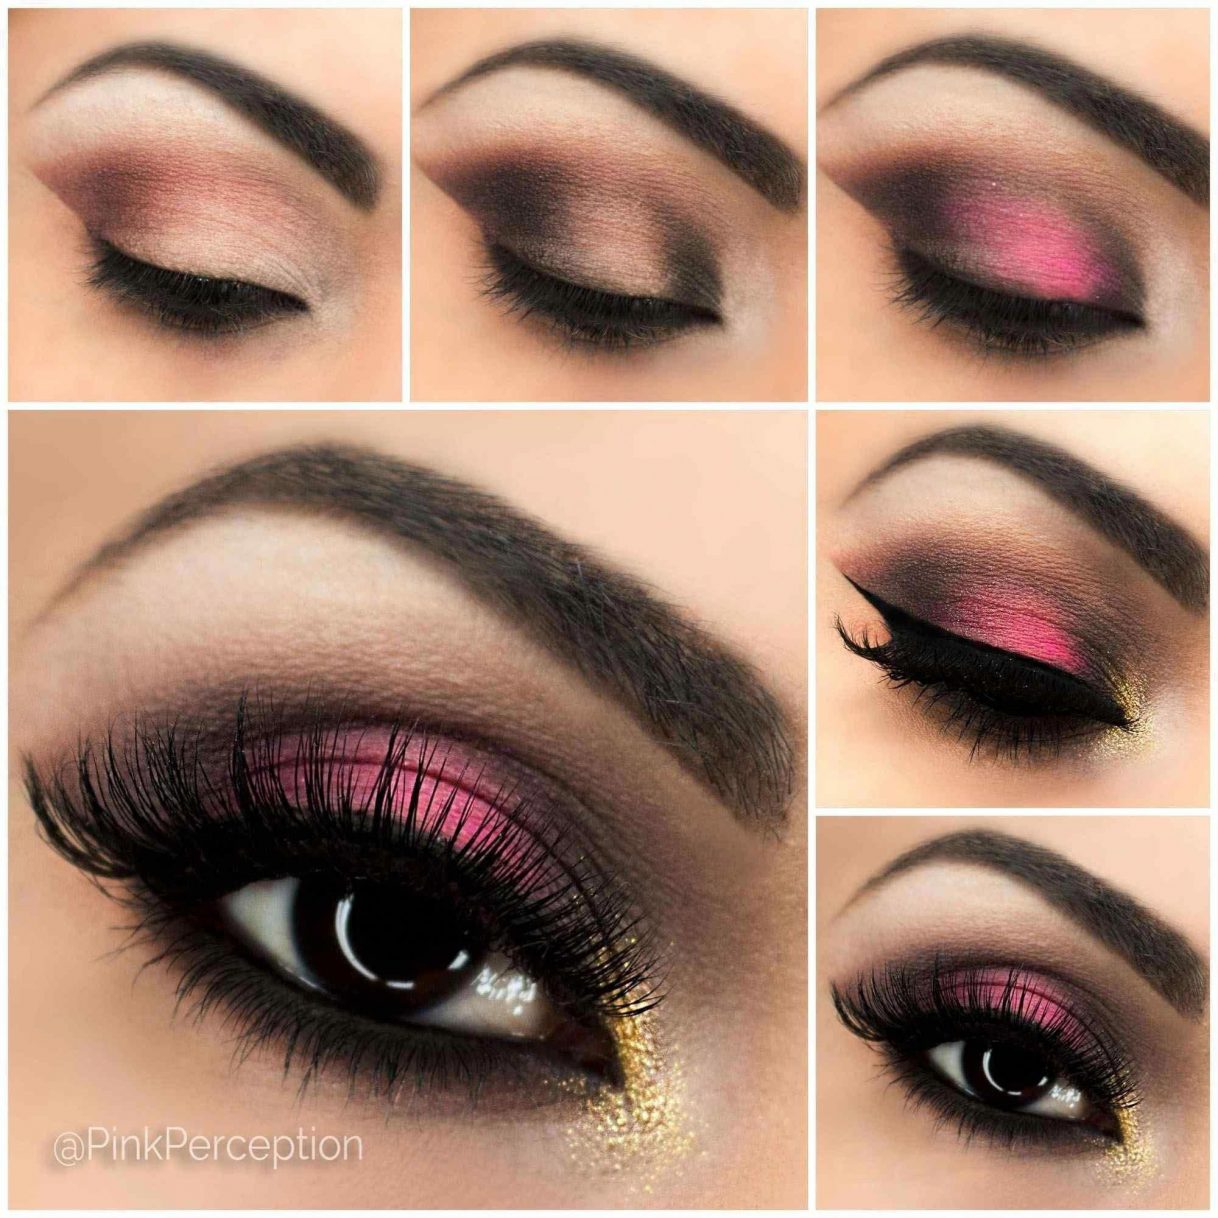 Eye Makeup Steps Essential Things For 23 Essential Steps To Best Of Makeup Ideas